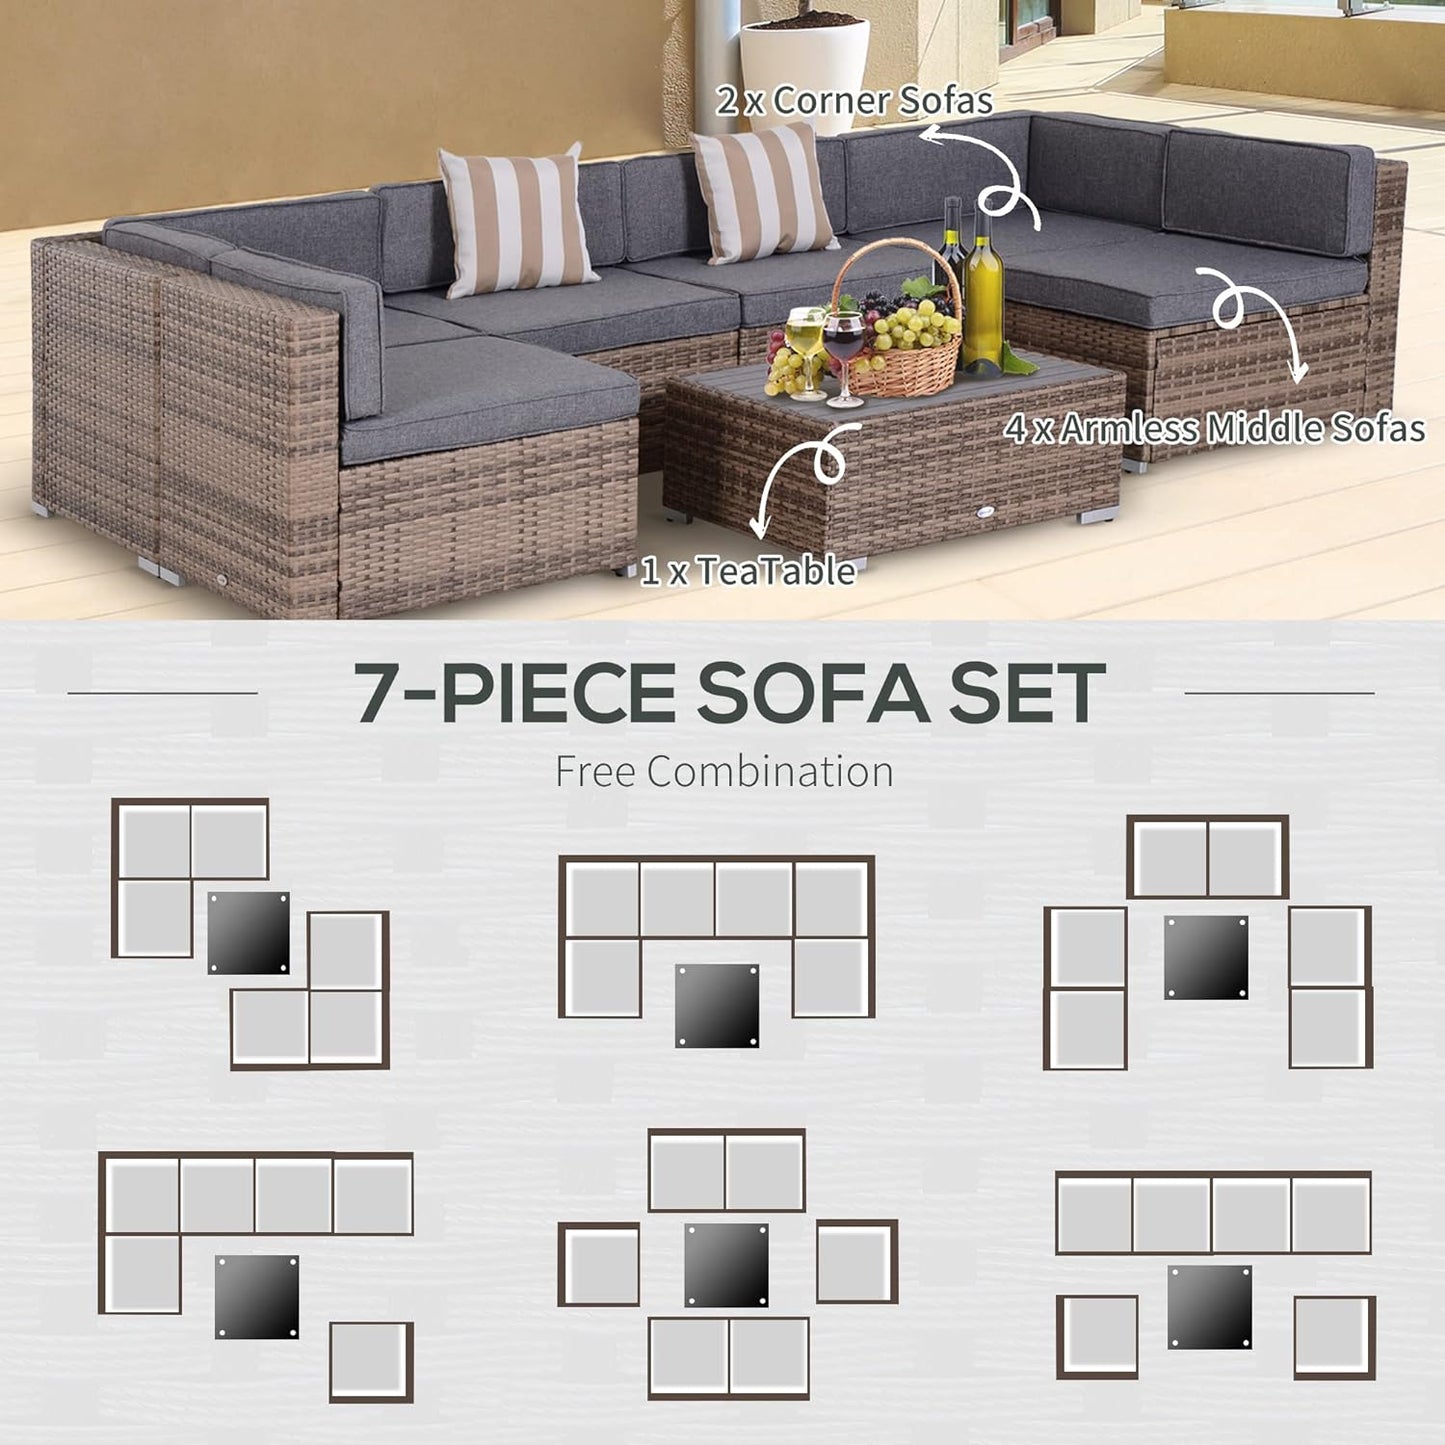 7 Piece Patio Furniture Set, PE Rattan Outdoor Conversation Set with Sectional Sofa, Glass Tabletop, Cushions and Pillows for Garden, Lawn, Deck, Dark Beige and Grey